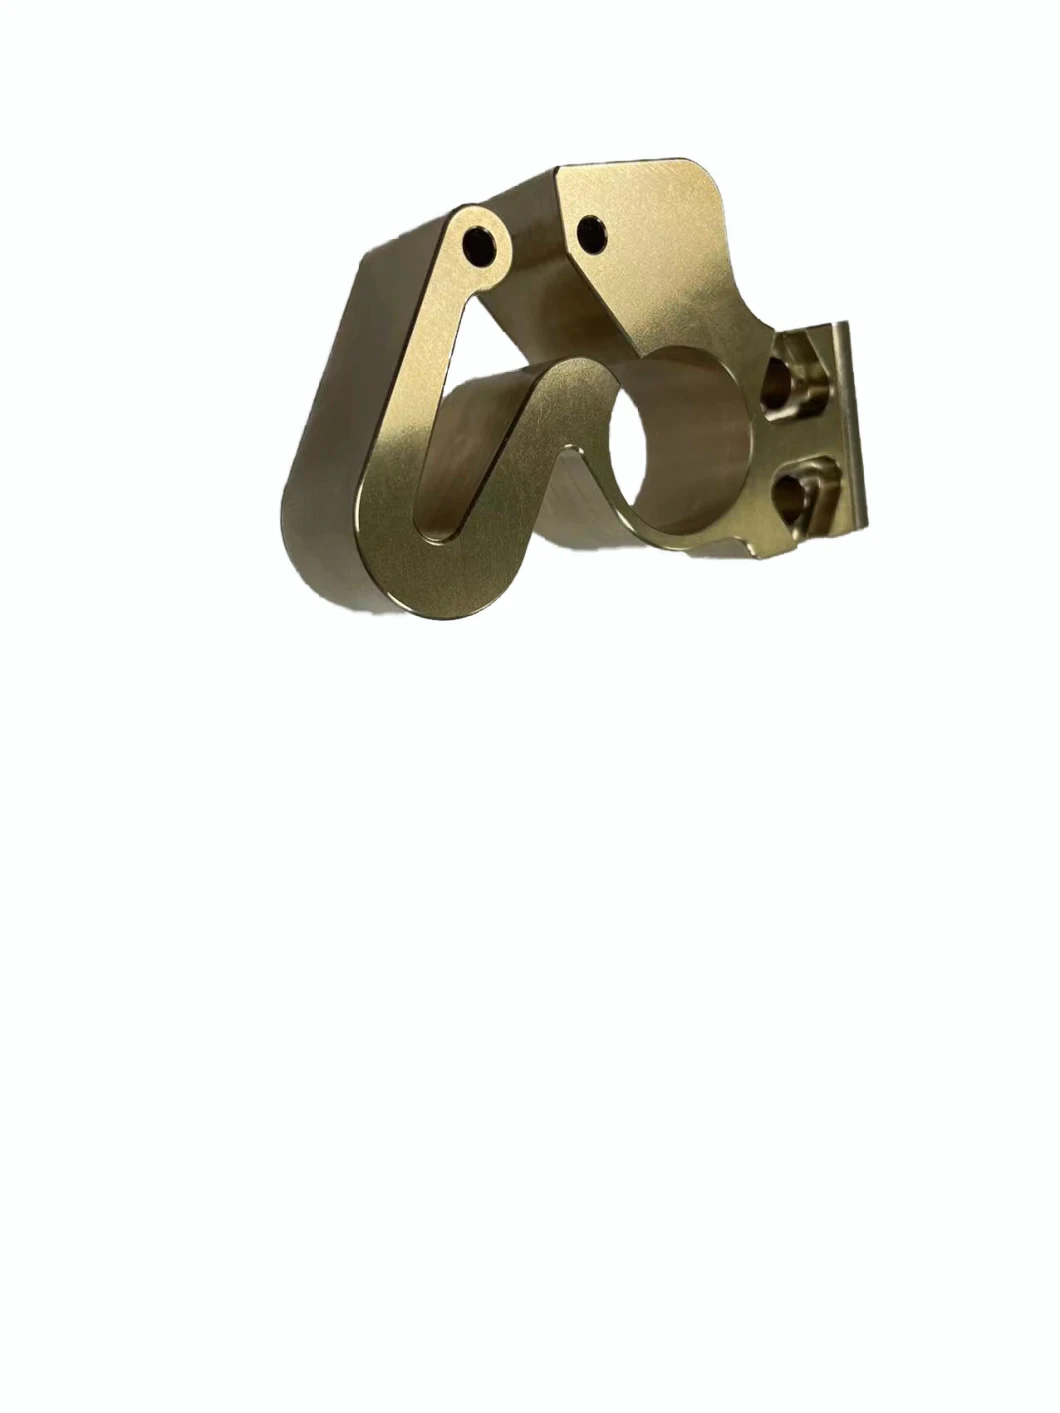 CNC Machined Milling Forging/Block Copper Brass Parts Europe Industry Precise CNC Milling Copper CNC Machining Milling